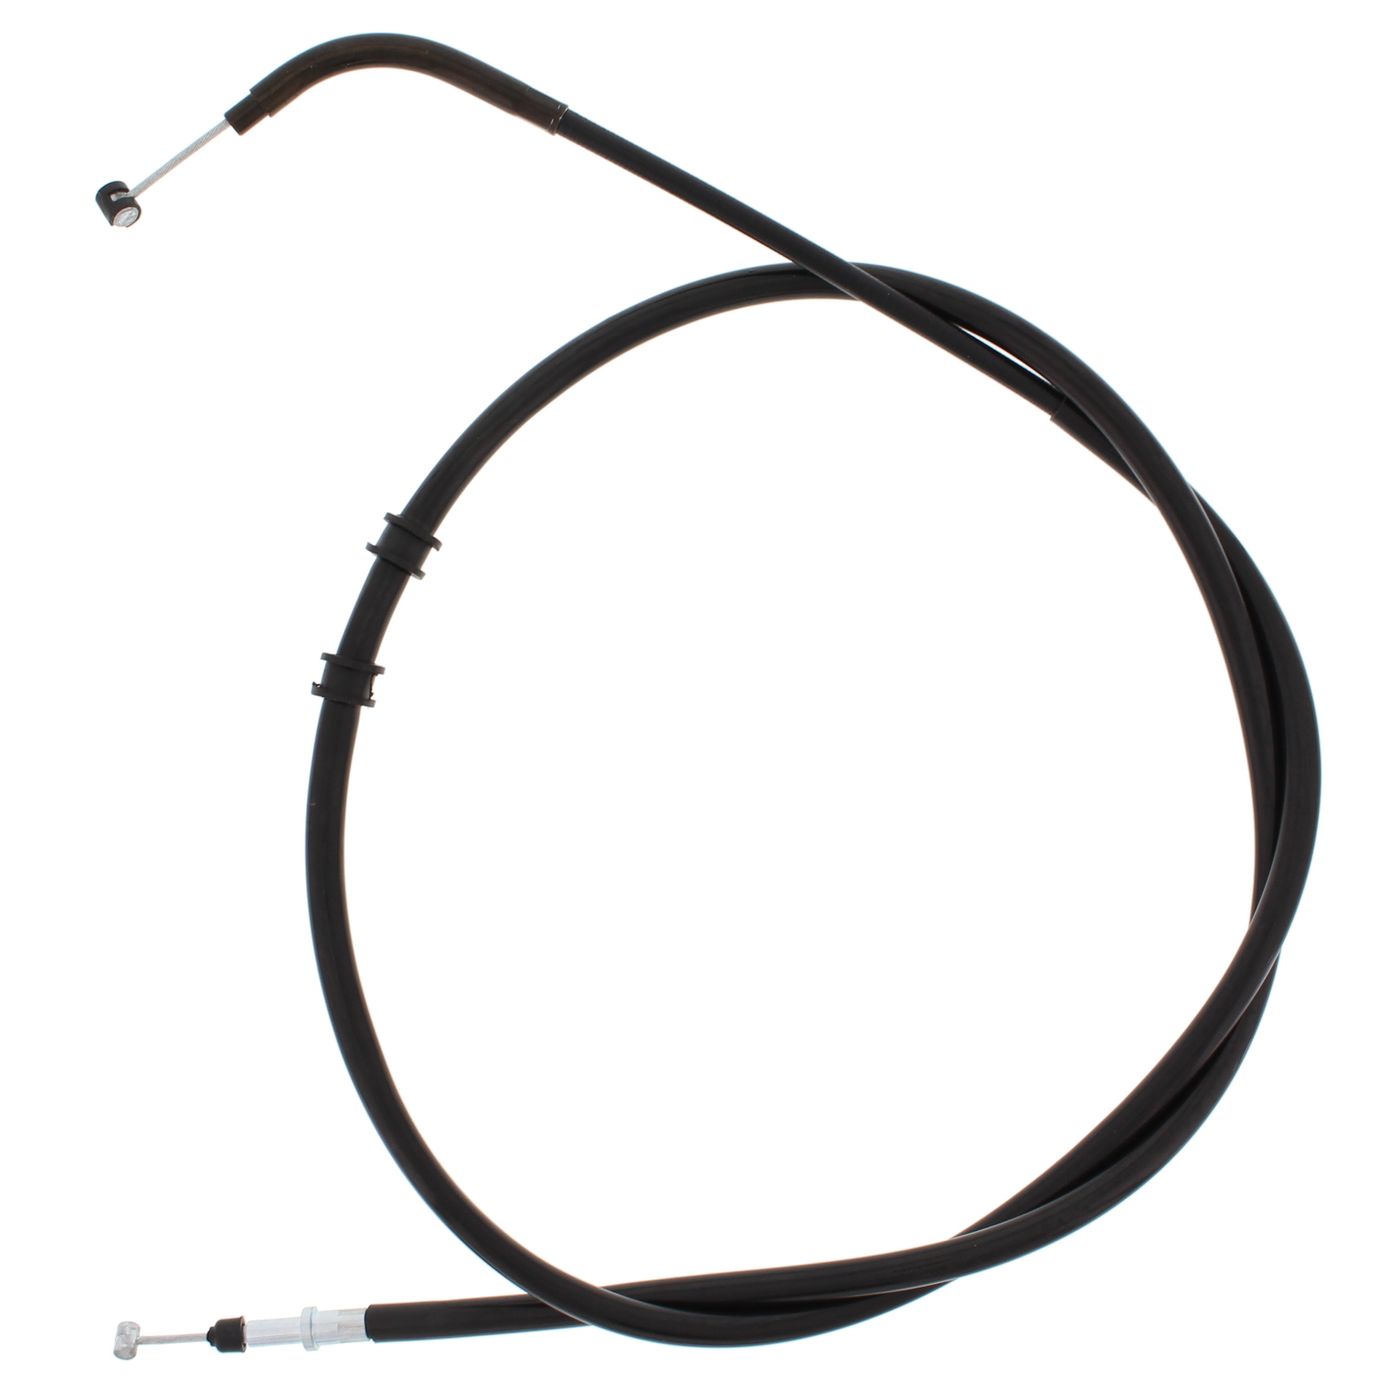 Wrp Brake Cables - WRP454045 image